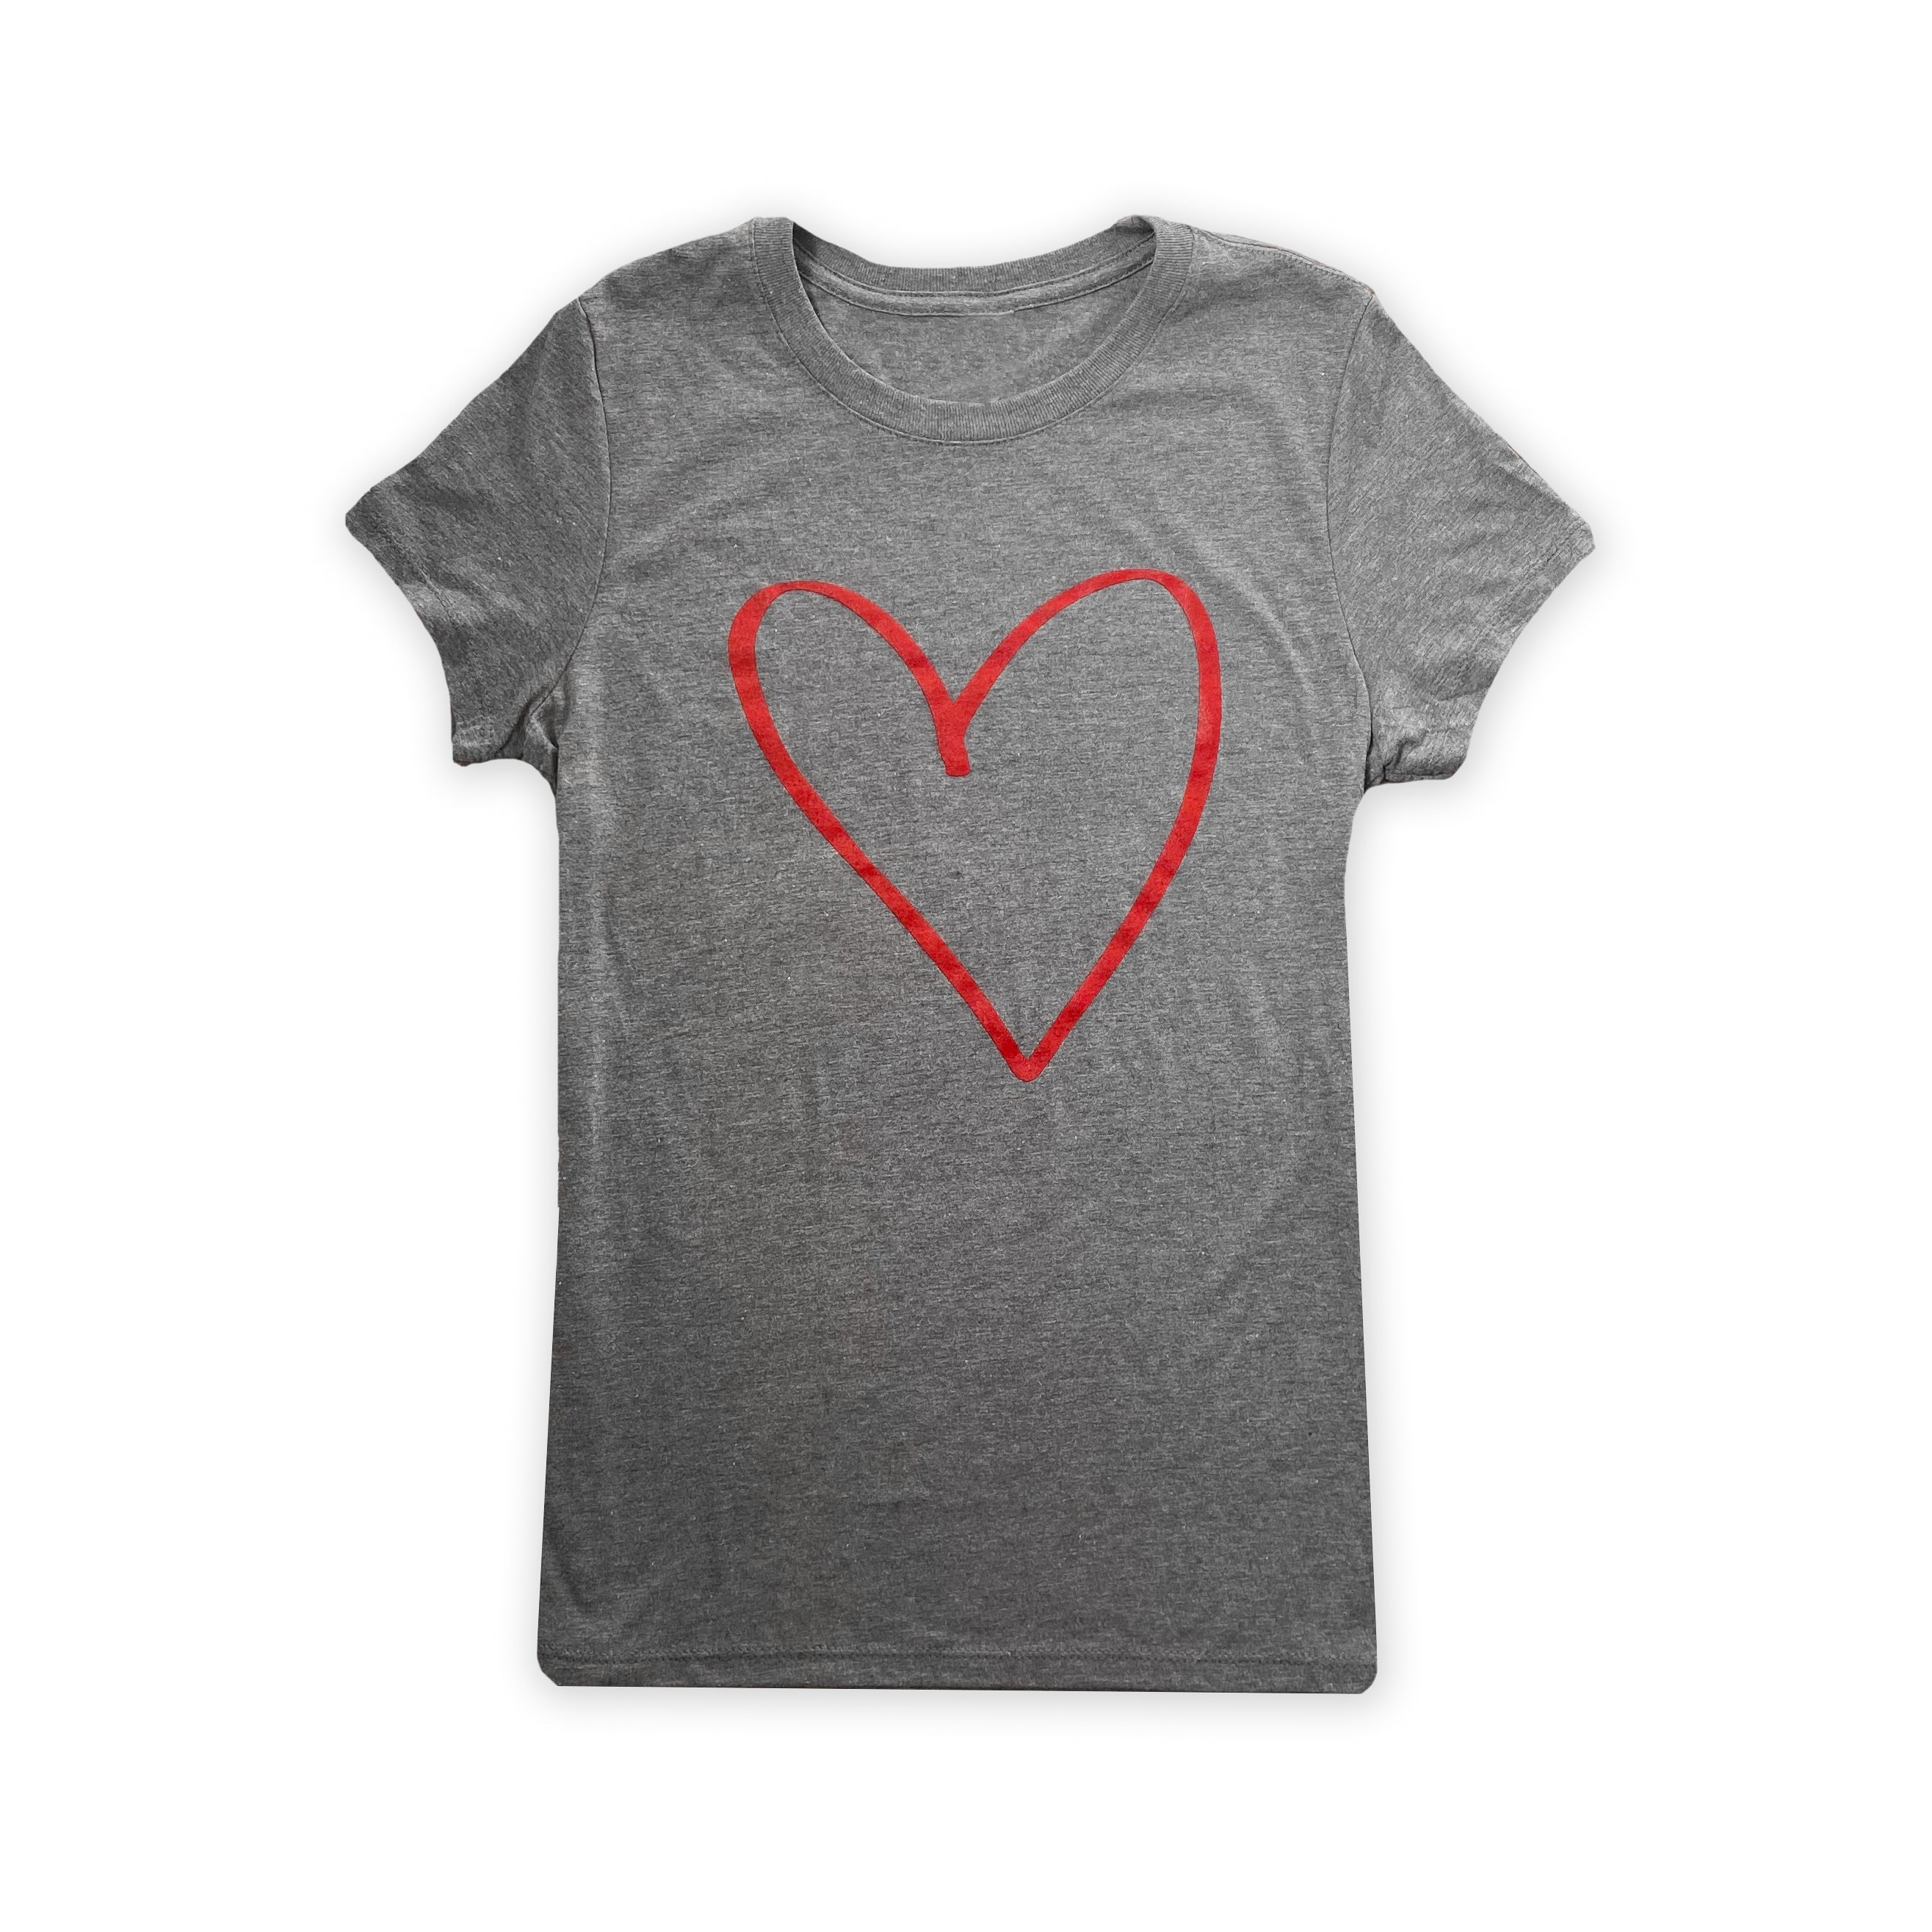 ON SALE - Show Some Love Heart Tee (Discount shown in cart)